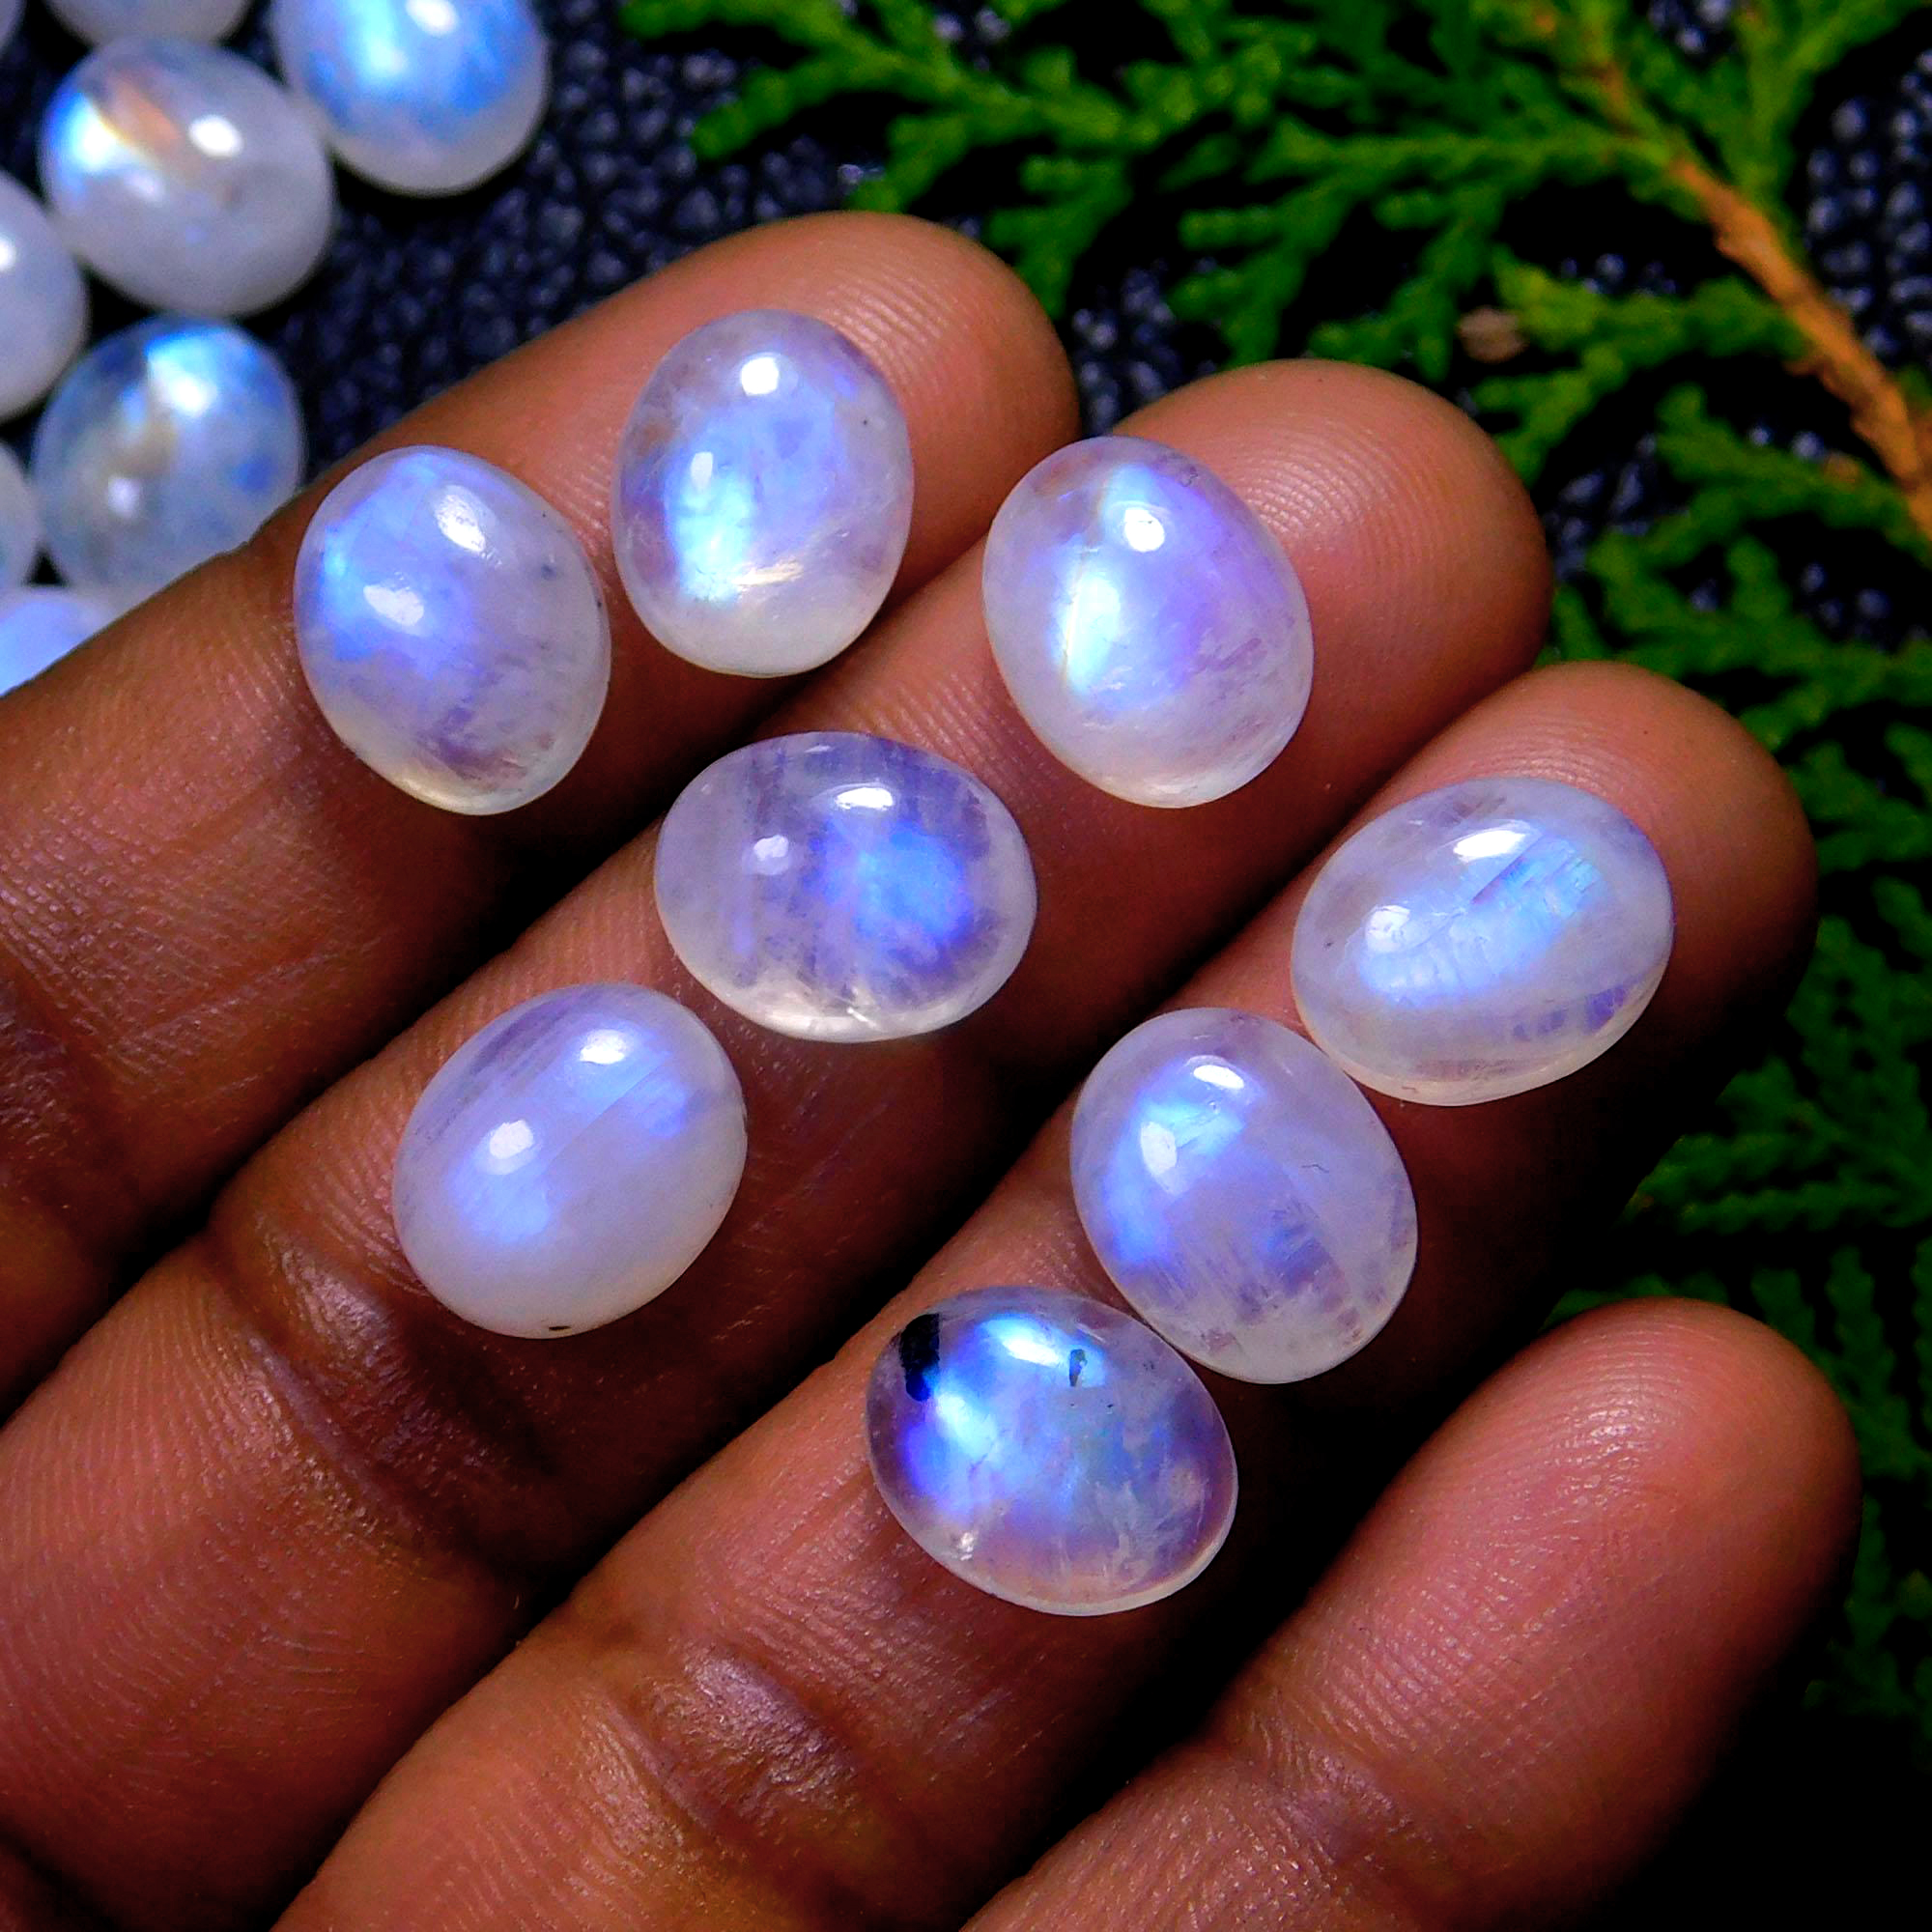 62Pcs 264Cts Natural Rainbow Moonstone Oval Shape Blue Fire Cabochon Lot Loose Gemstone Jewelry Crystal For Birthday Gift 11X9mm #9848